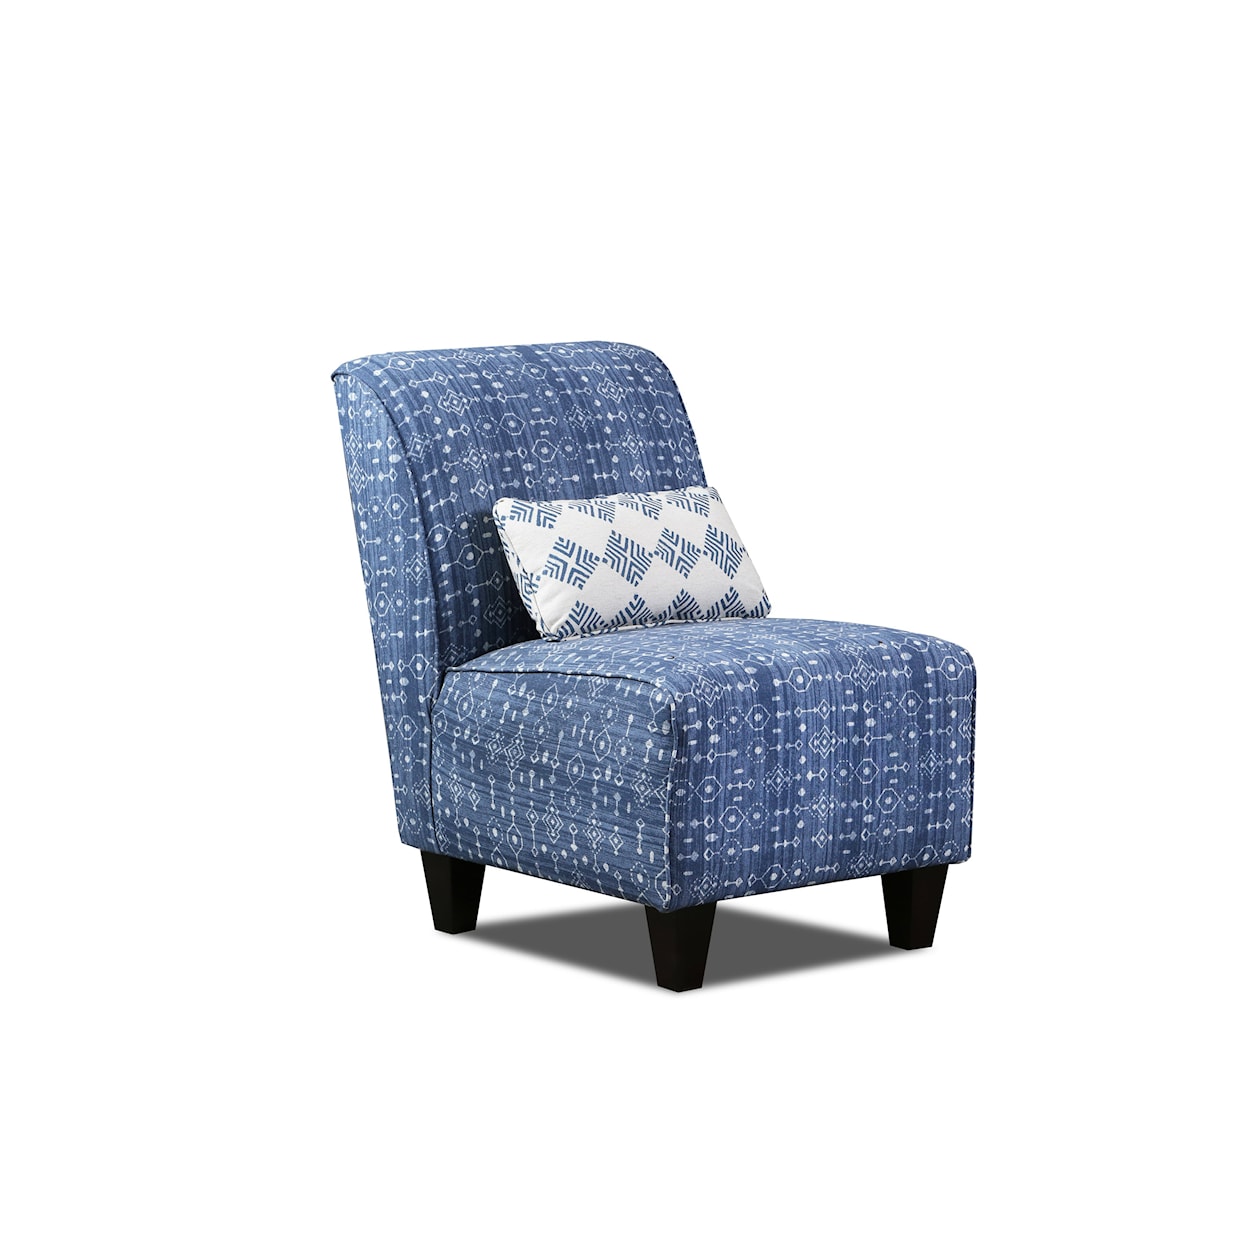 Magnolia Upholstery Design 1650 Taos Navy Chair 